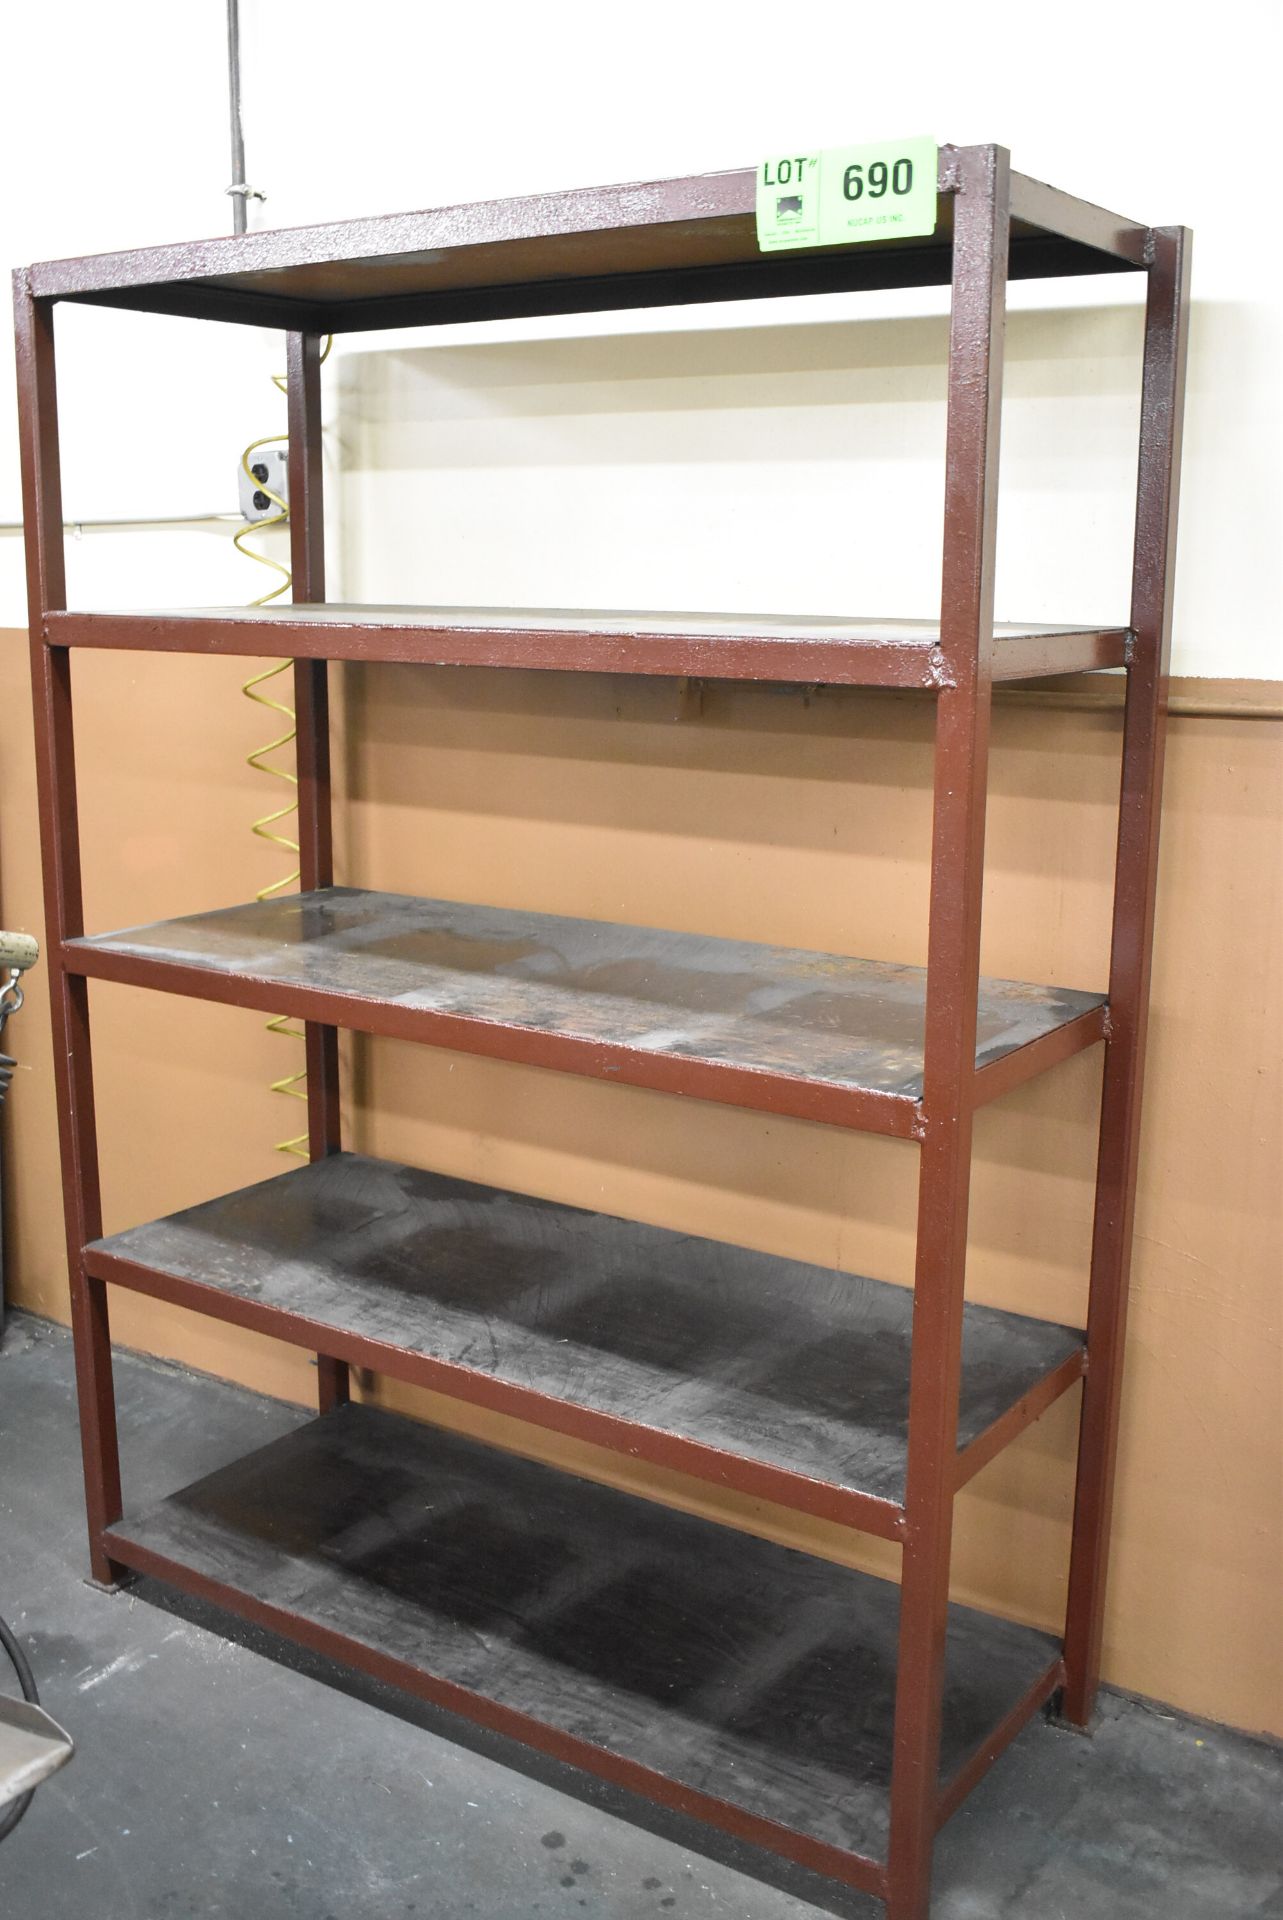 LOT/ (2) STEEL RACKS (CONTENTS NOT INCLUDED)